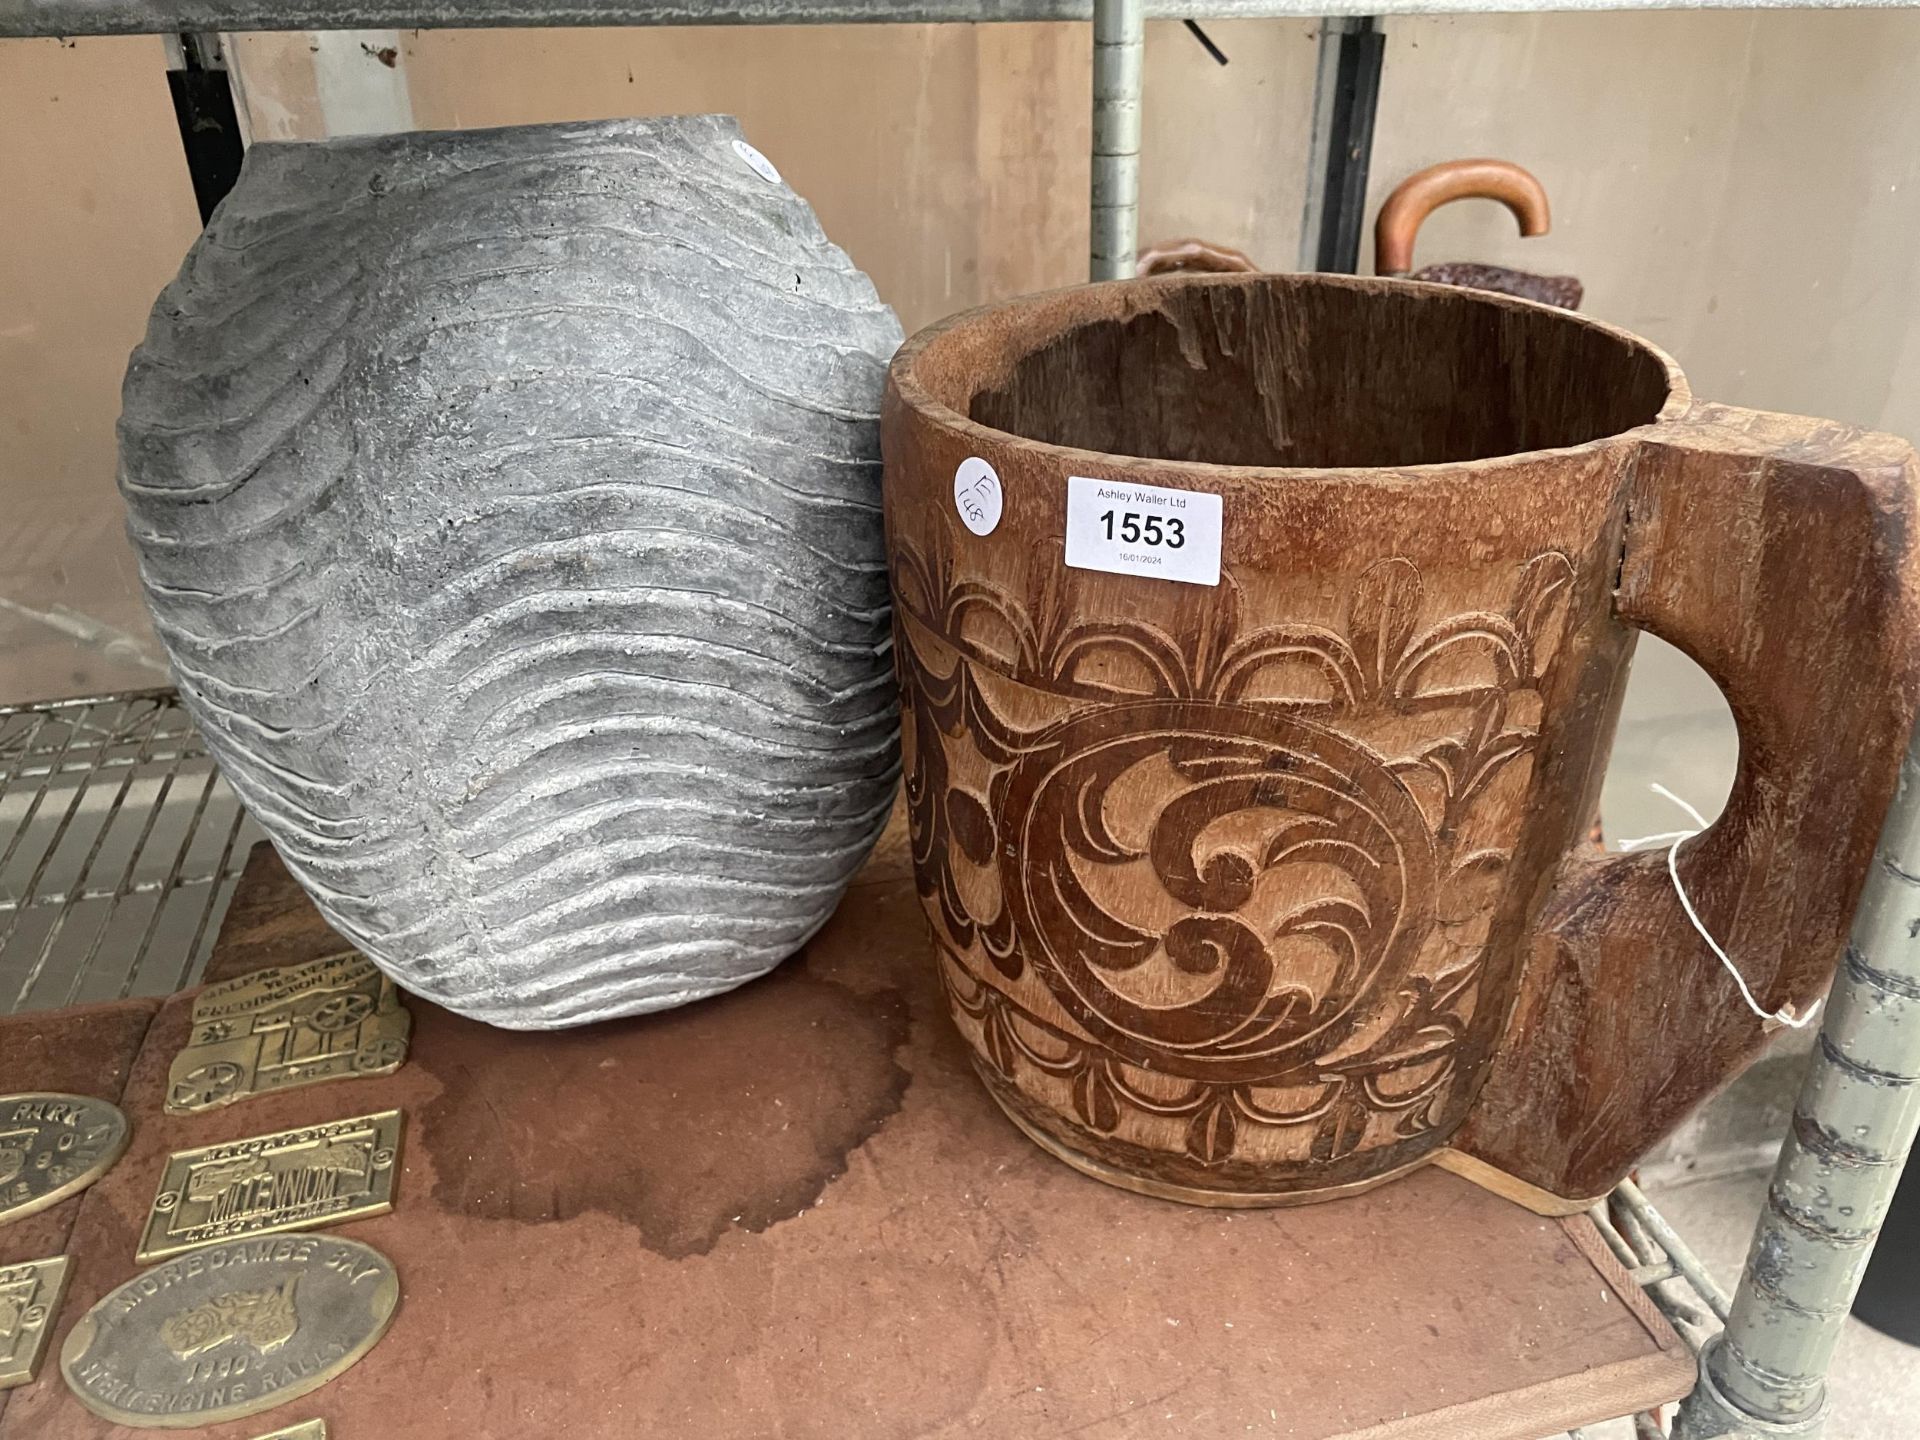 A LARGE DECORATIVE WOODEN CARVED CUP AND A CONCRETE PLANTER